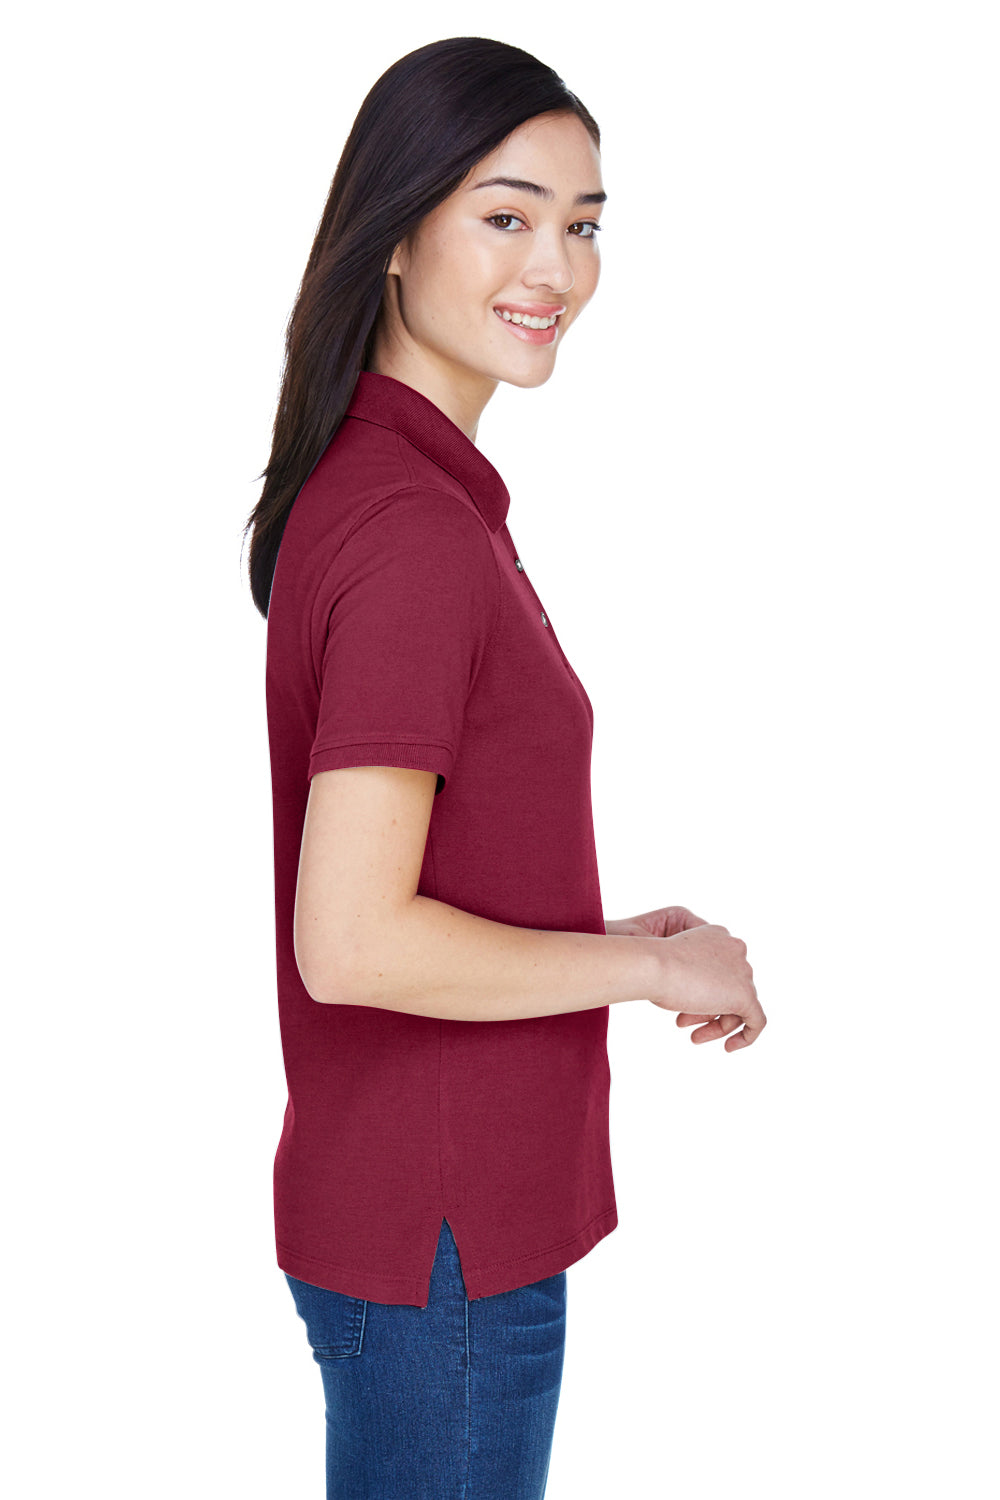 Harriton M265W Womens Easy Blend Wrinkle Resistant Short Sleeve Polo Shirt Wine Red Side